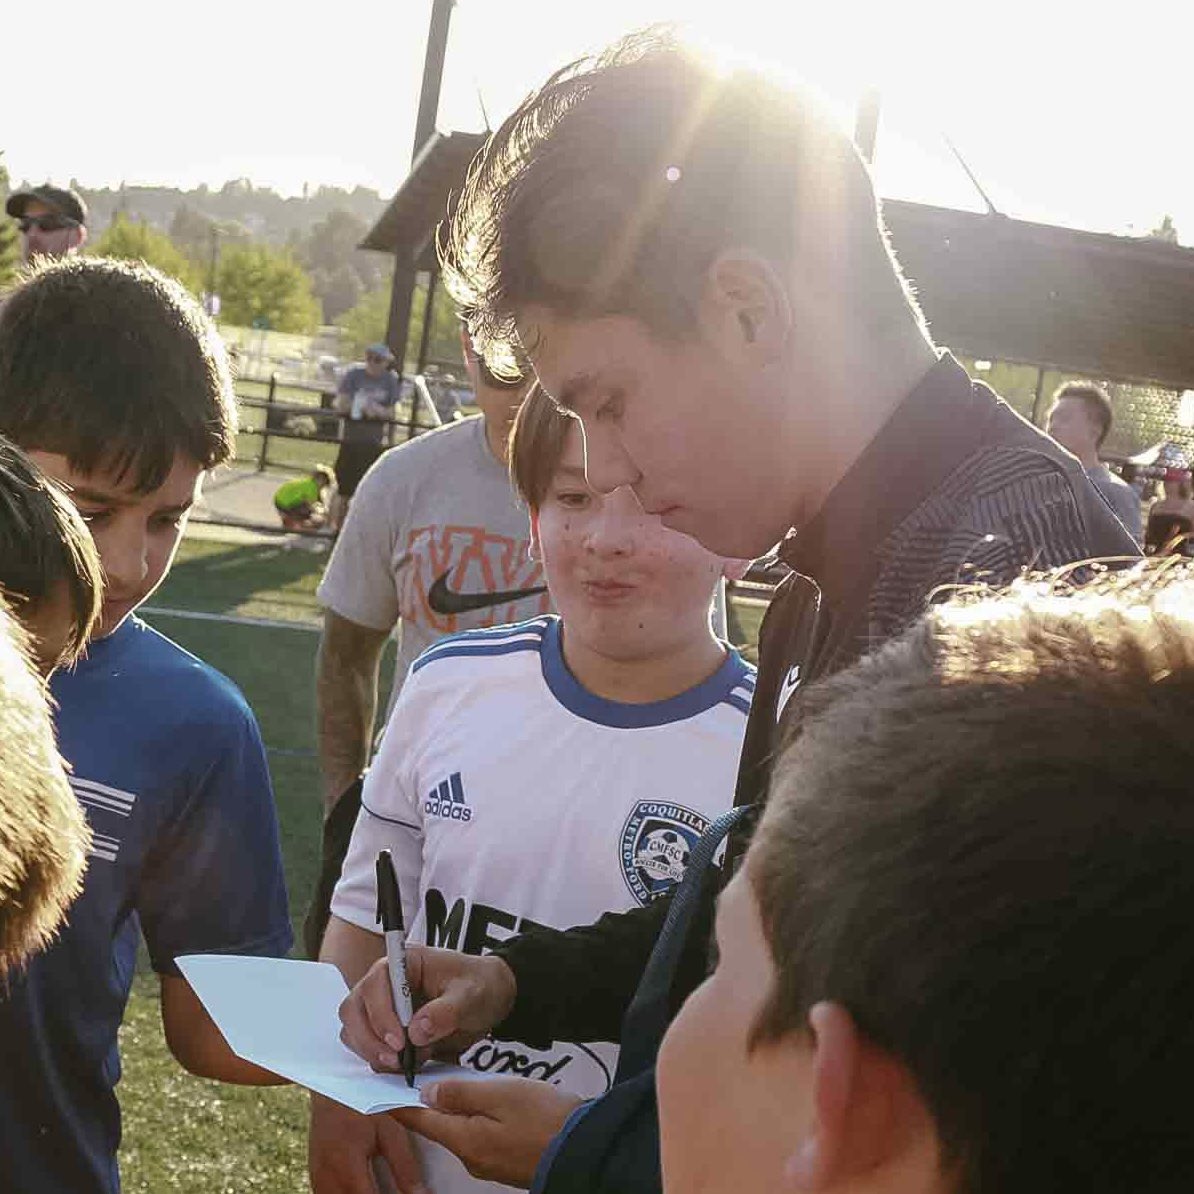 Web Article ‼️: Inspiring the next generation of Canadian footballers 🇨🇦 This week VFC players @jkadinchung and Anthony White paid visit to the youth team where they started playing football as kids. ✍️: vancouverfc.canpl.ca/article/vancou… #VancouverFC | #CanPL